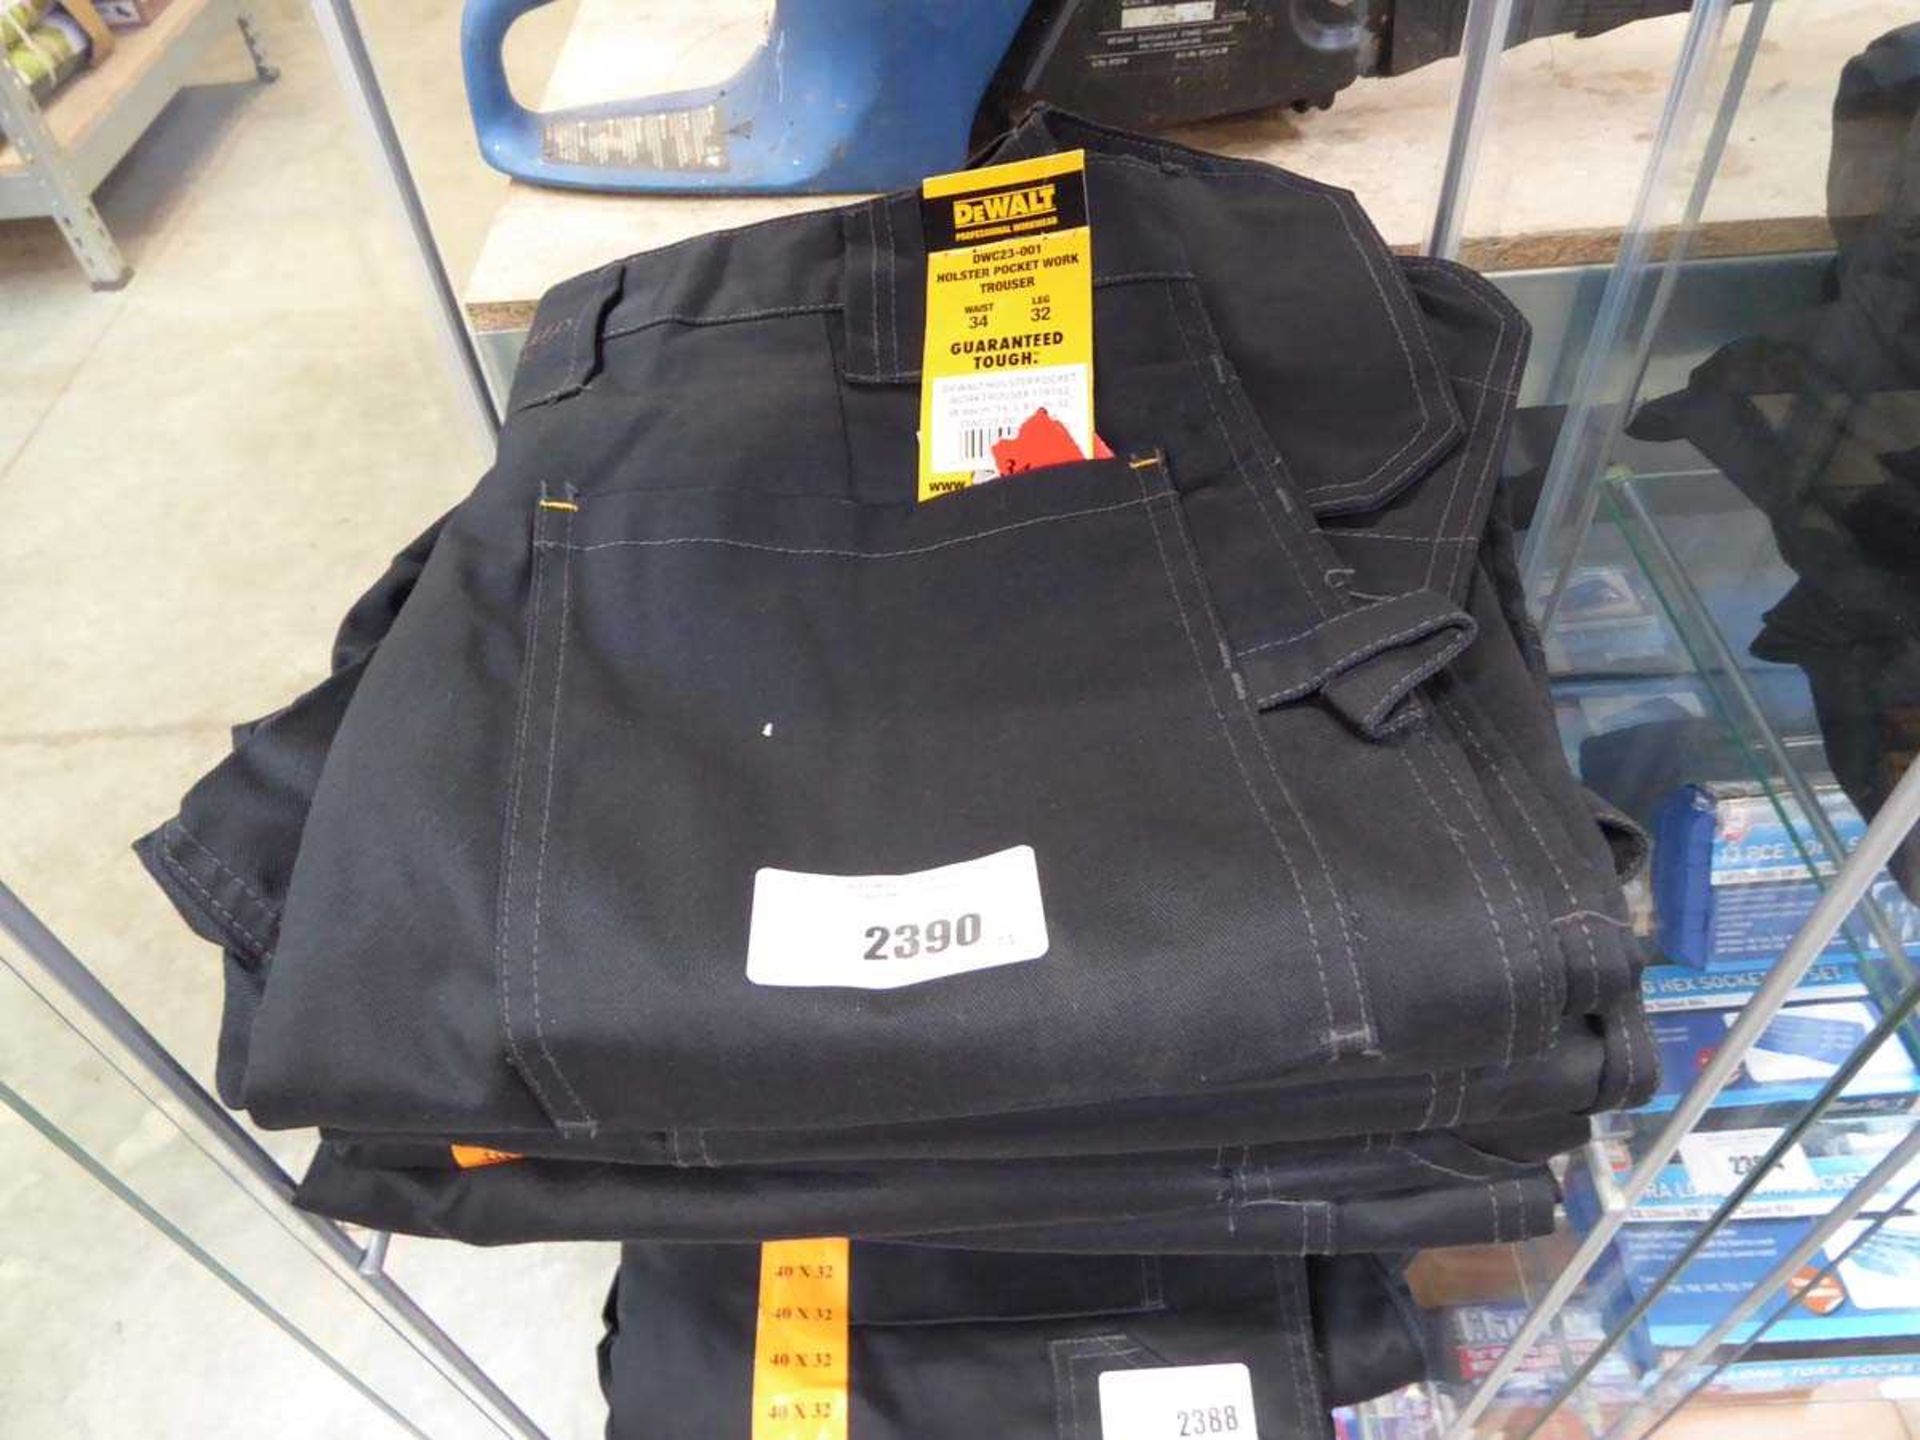 +VAT 5 pairs of Dewalt Holster pocket work trousers in black, mixed sizes